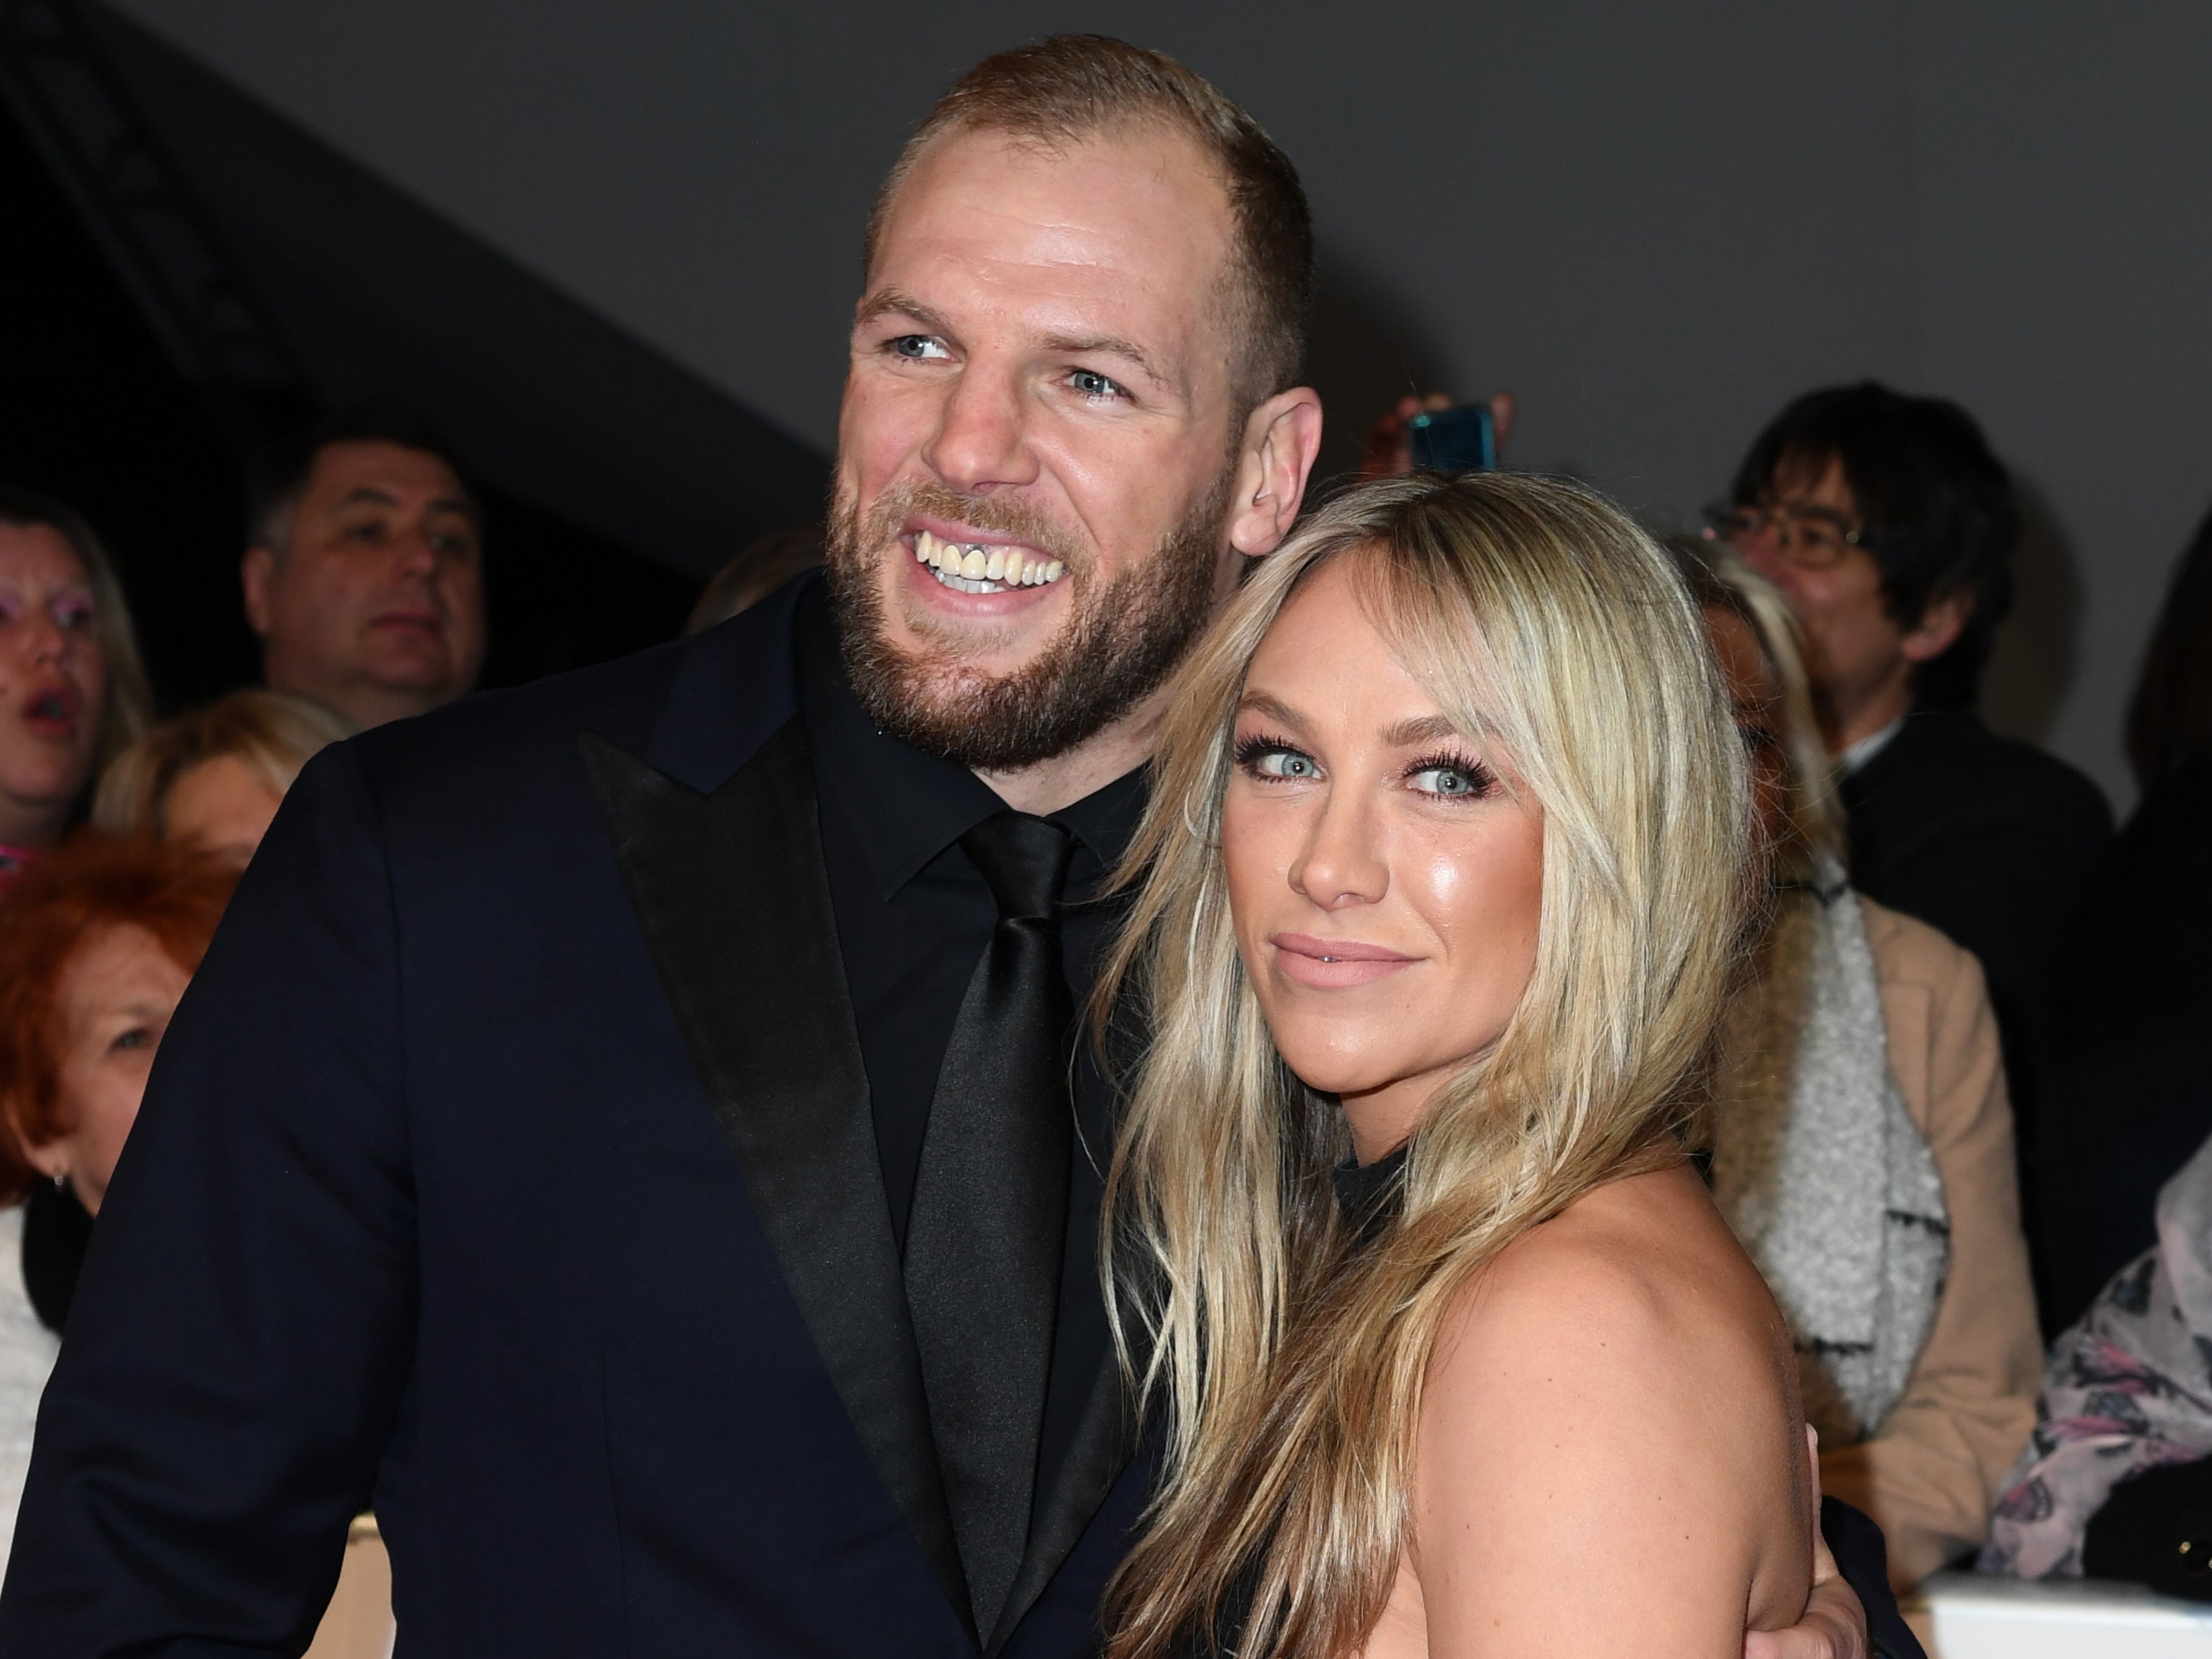 James Haskell and Chloe Madeley attends the National Television Awards 2020 at The O2 Arena on January 28, 2020